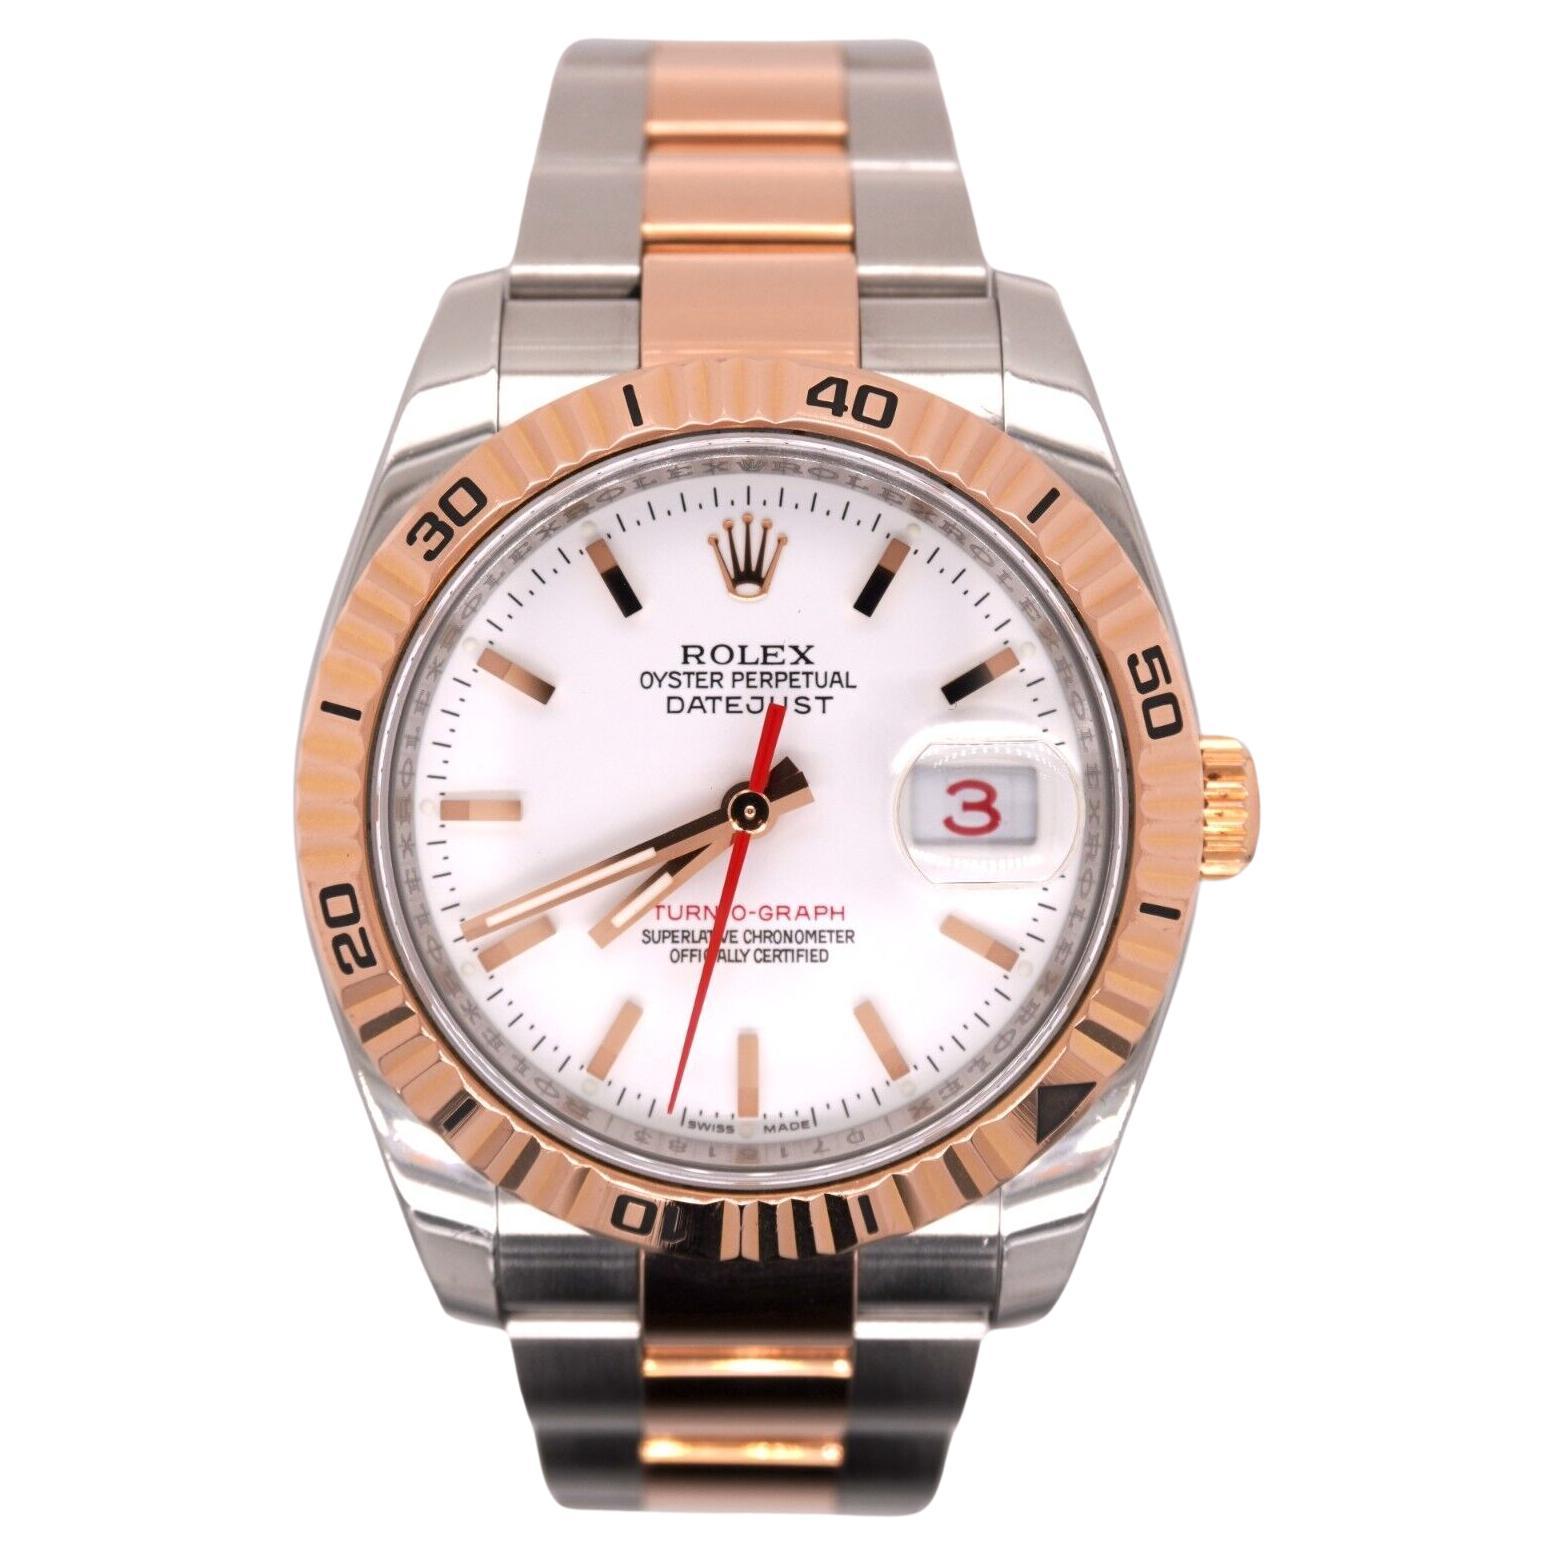 Rolex Men Datejust 36mm Turn-O-Graph 18K Rose Gold/Steel Watch Oyster 116261 For Sale